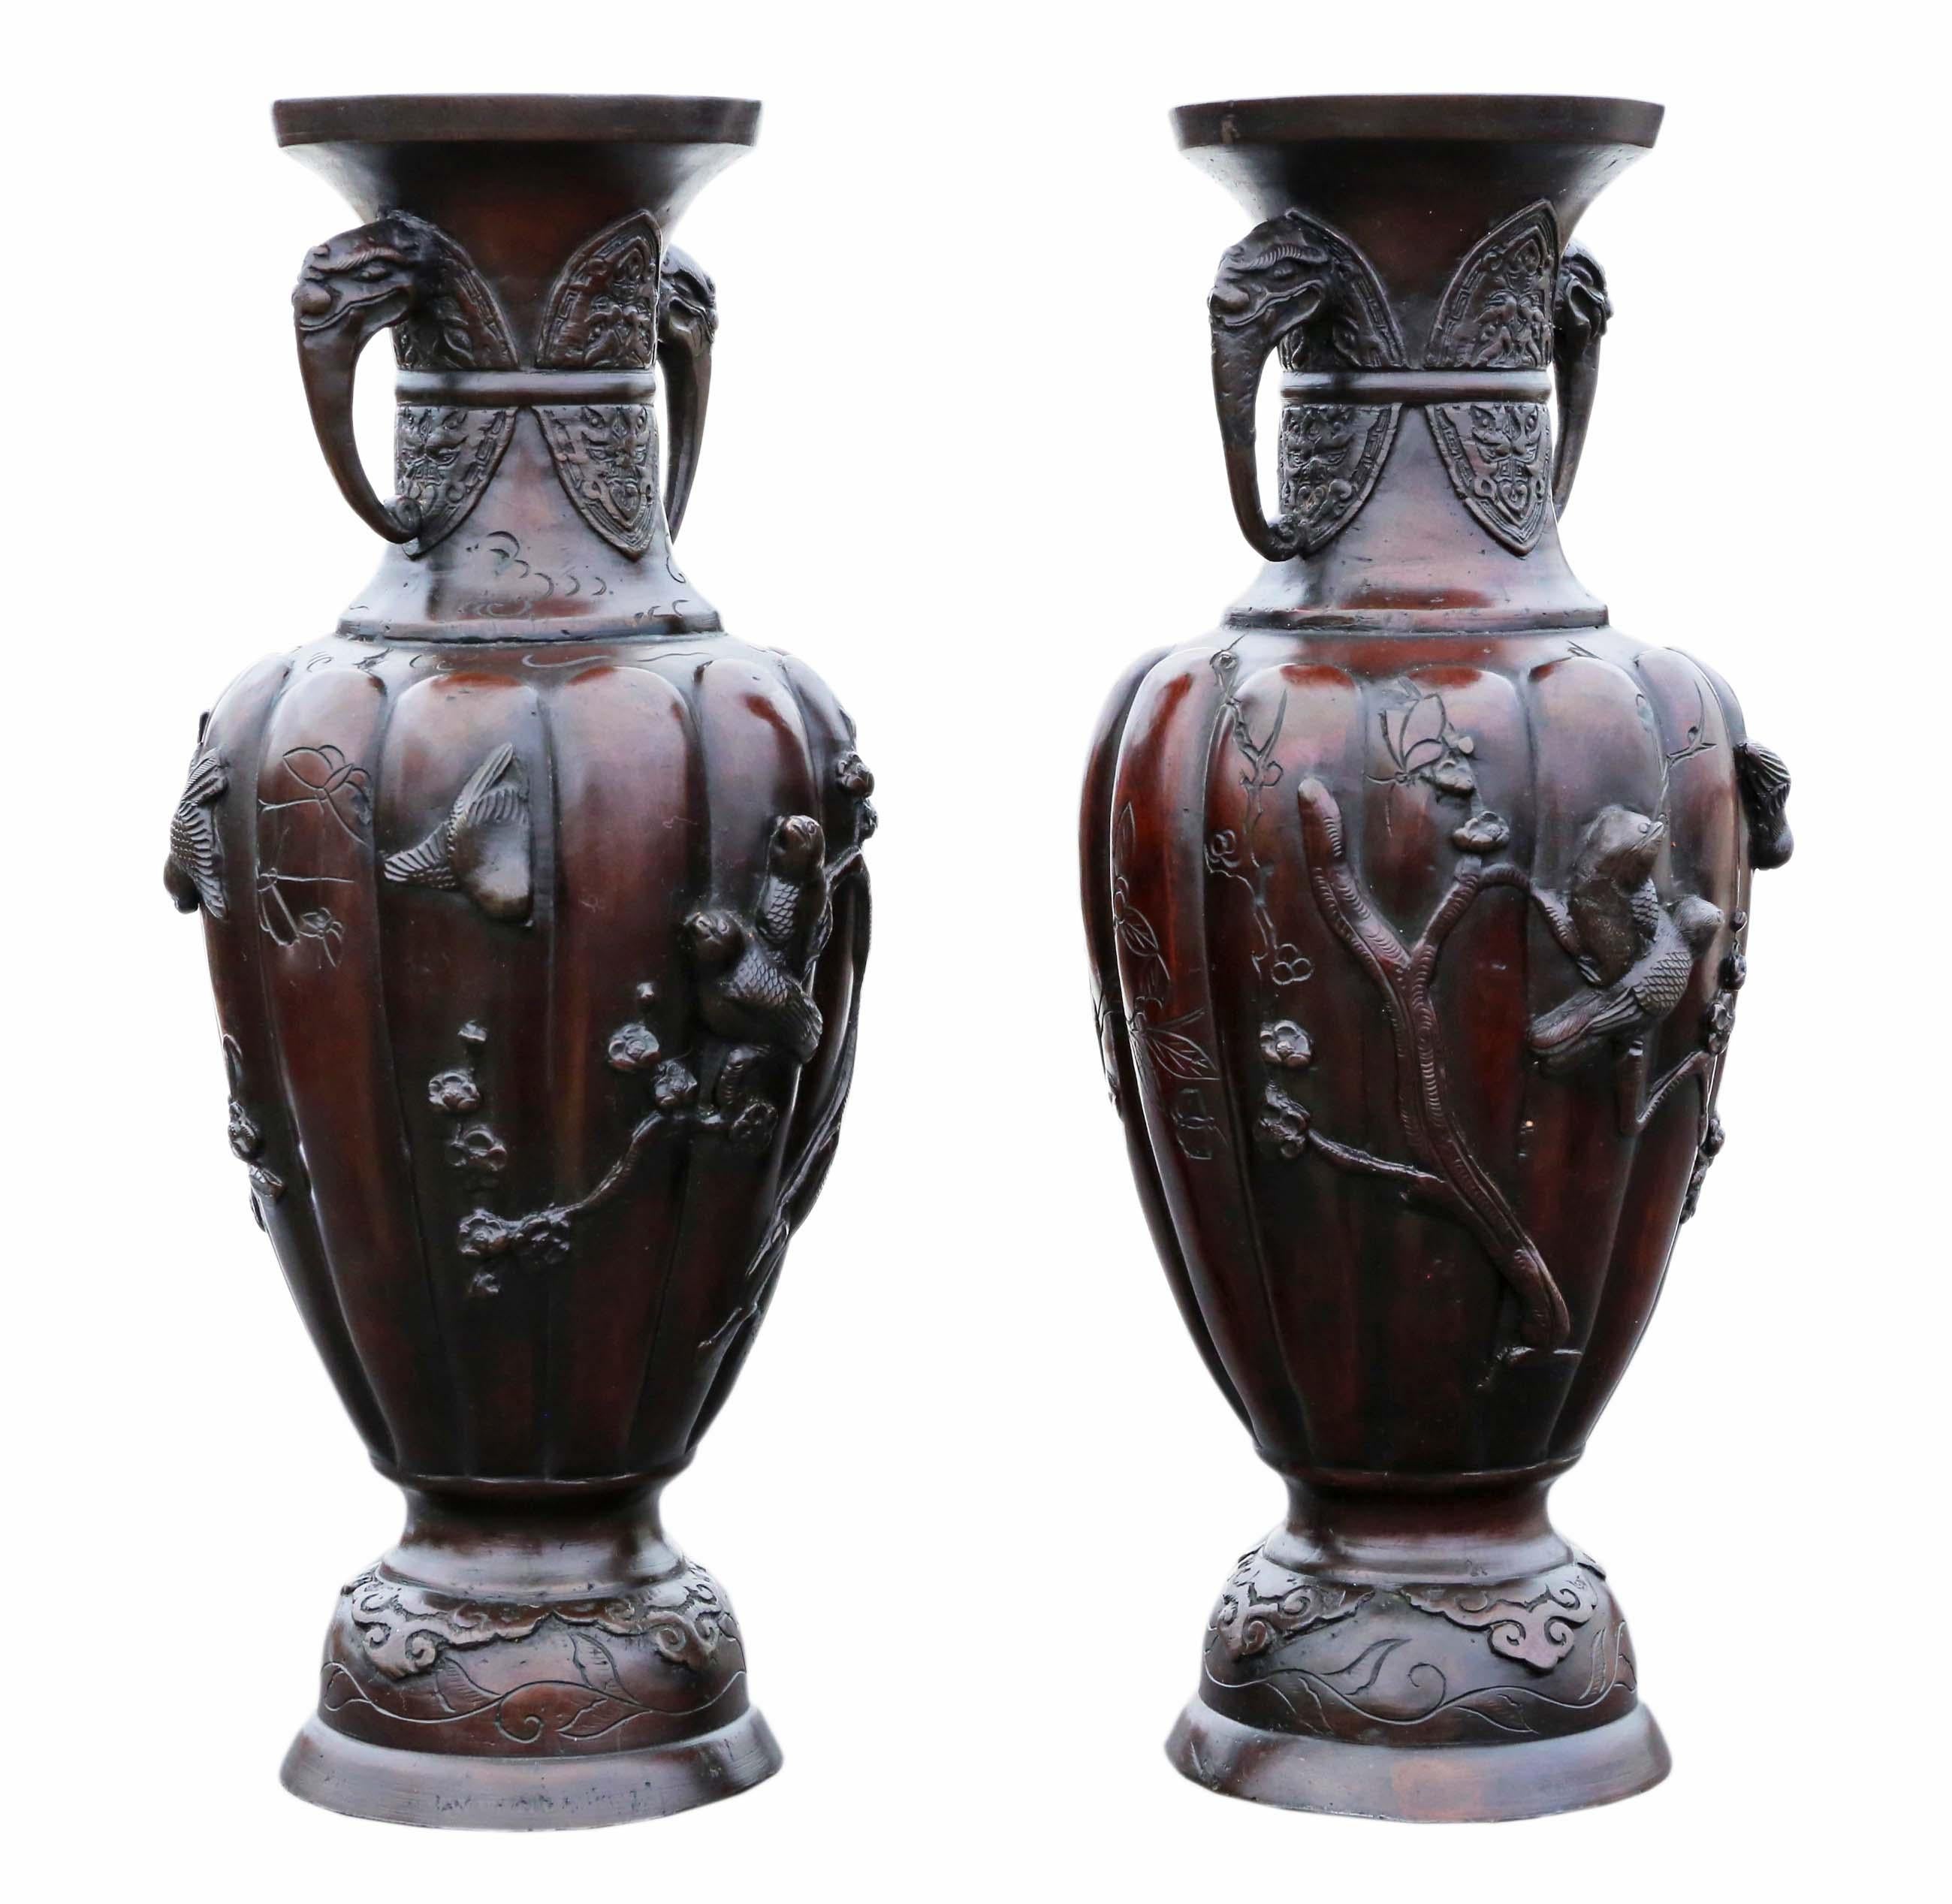 Antique very large pair of fine quality Japanese bronze vases C1900 Meiji Period. 

Would look amazing in the right location. Rare large size and design.

Overall maximum dimensions: 35cmH x 14cm diameter. Weigh 2.3Kg each.

In very good